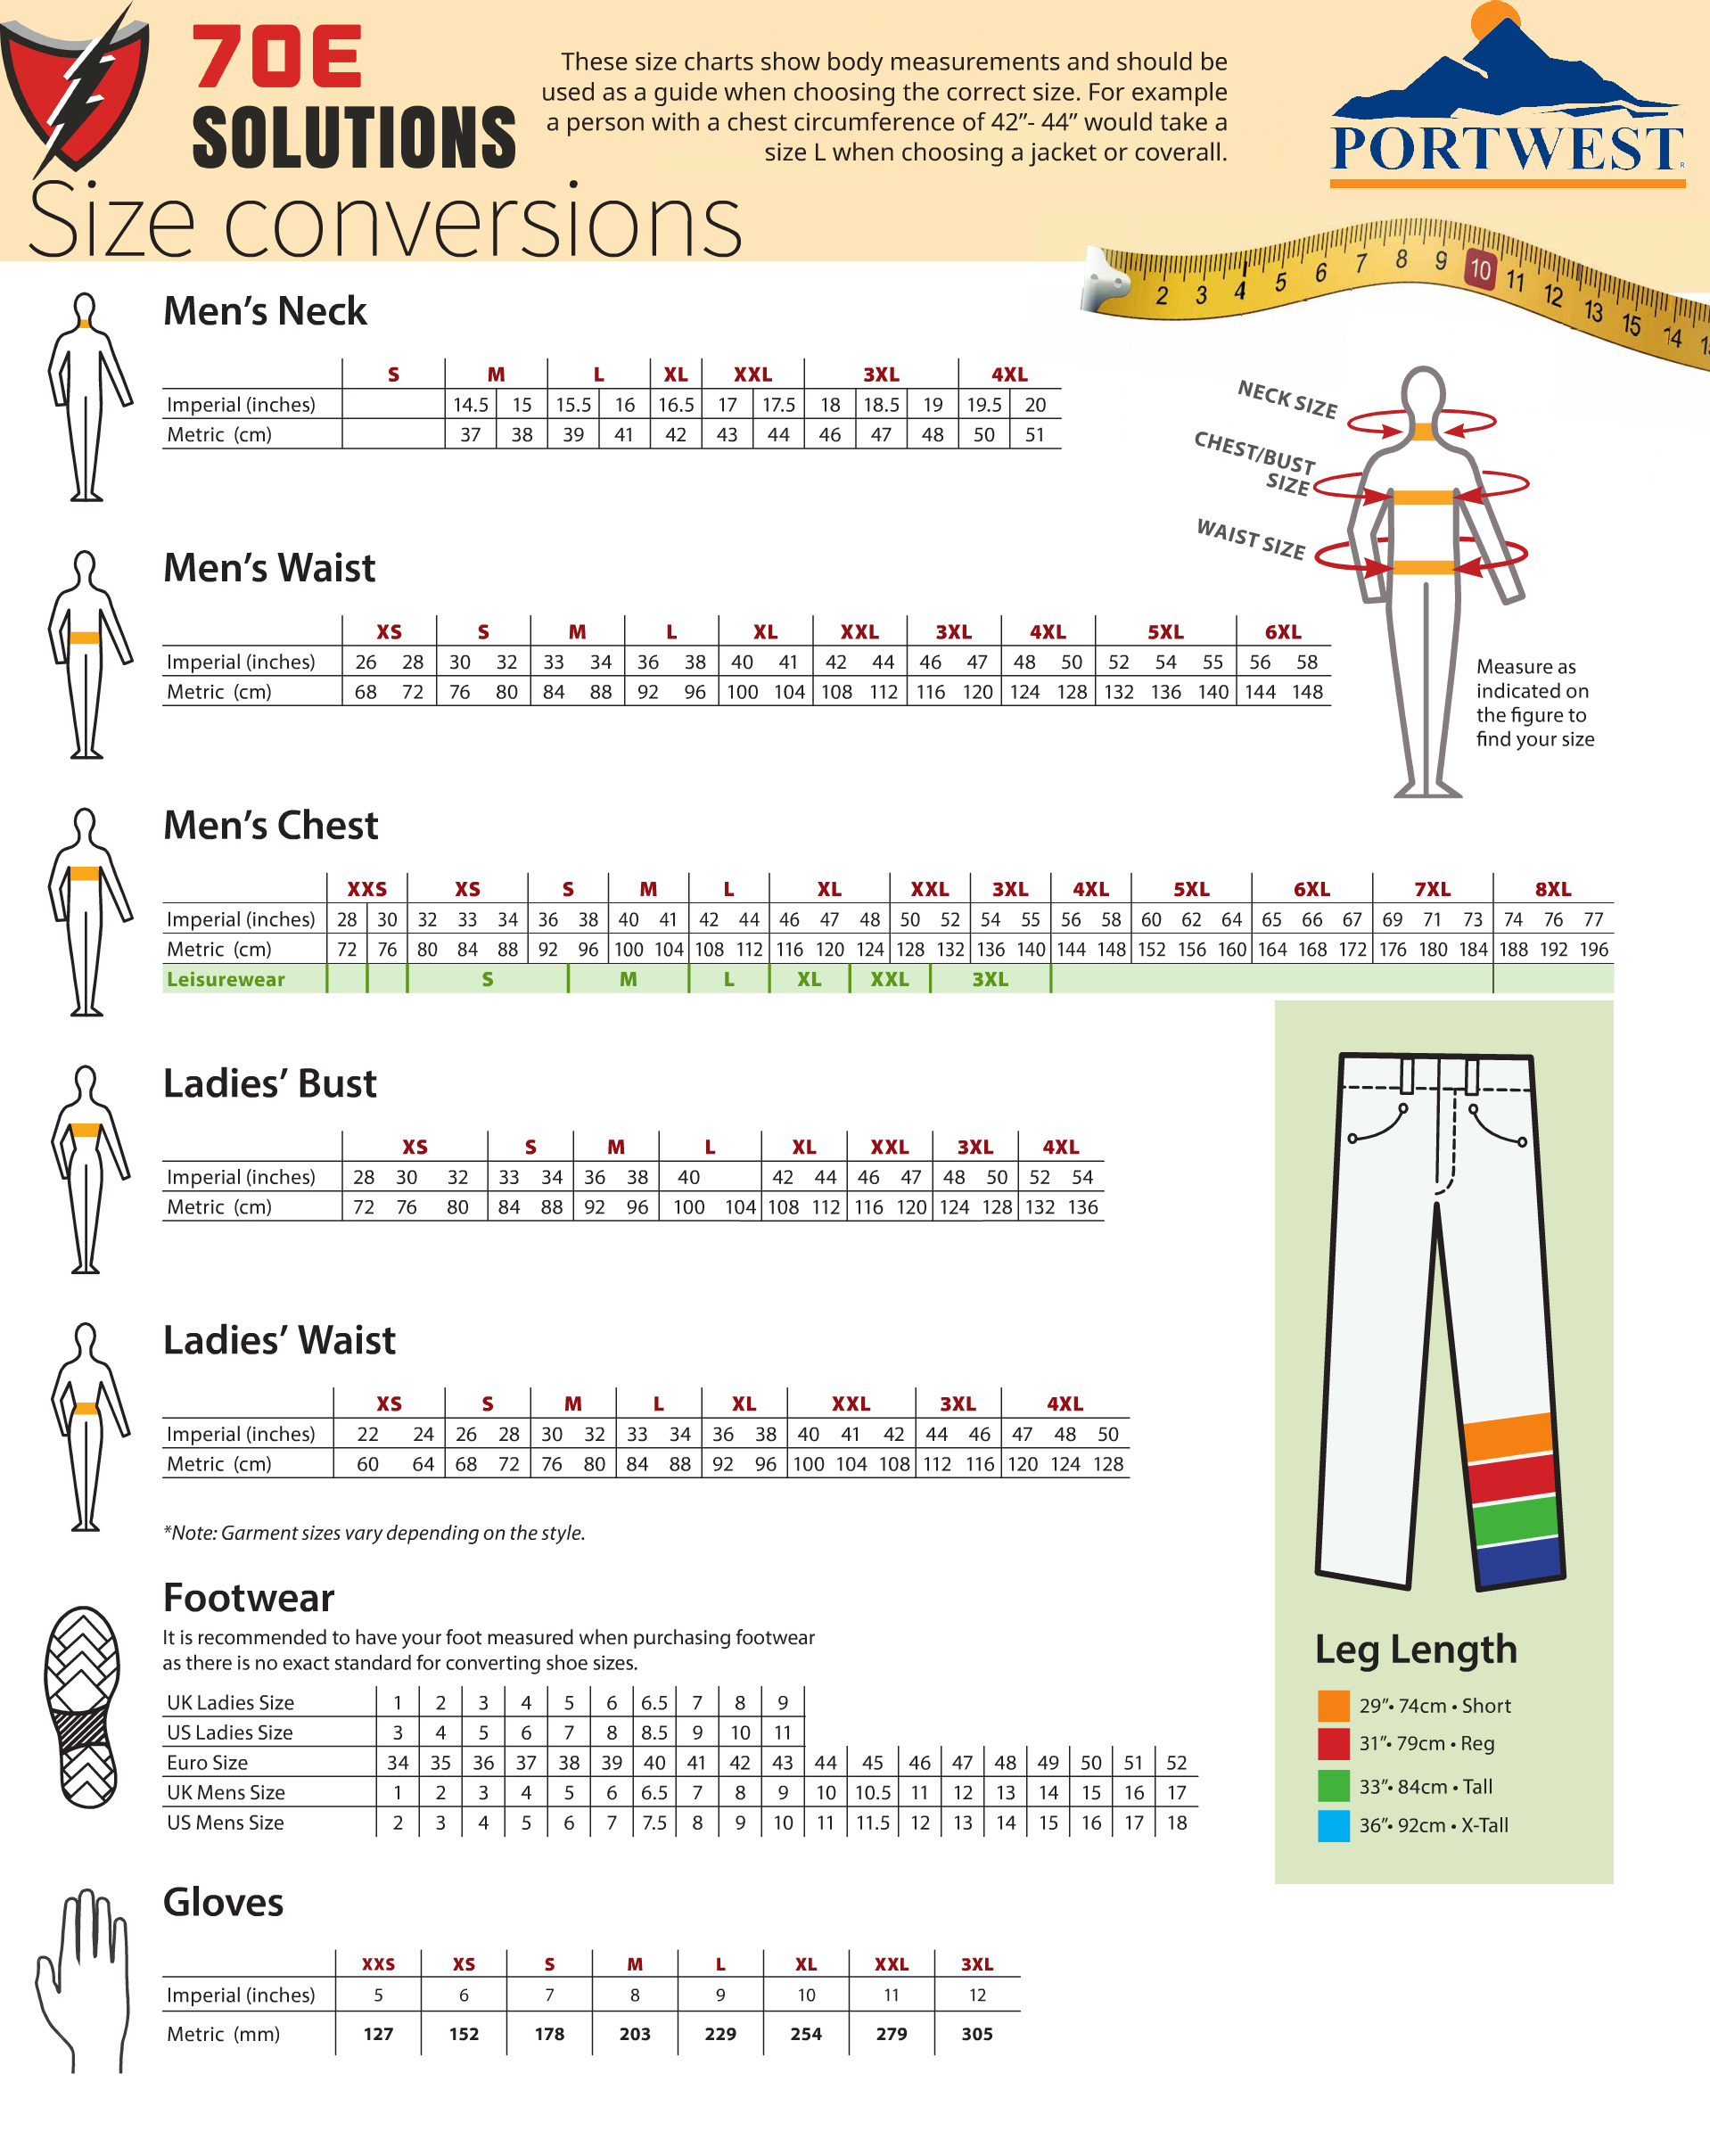 Sizing chart for Portwest garments. Use these charts to determine your garments size.